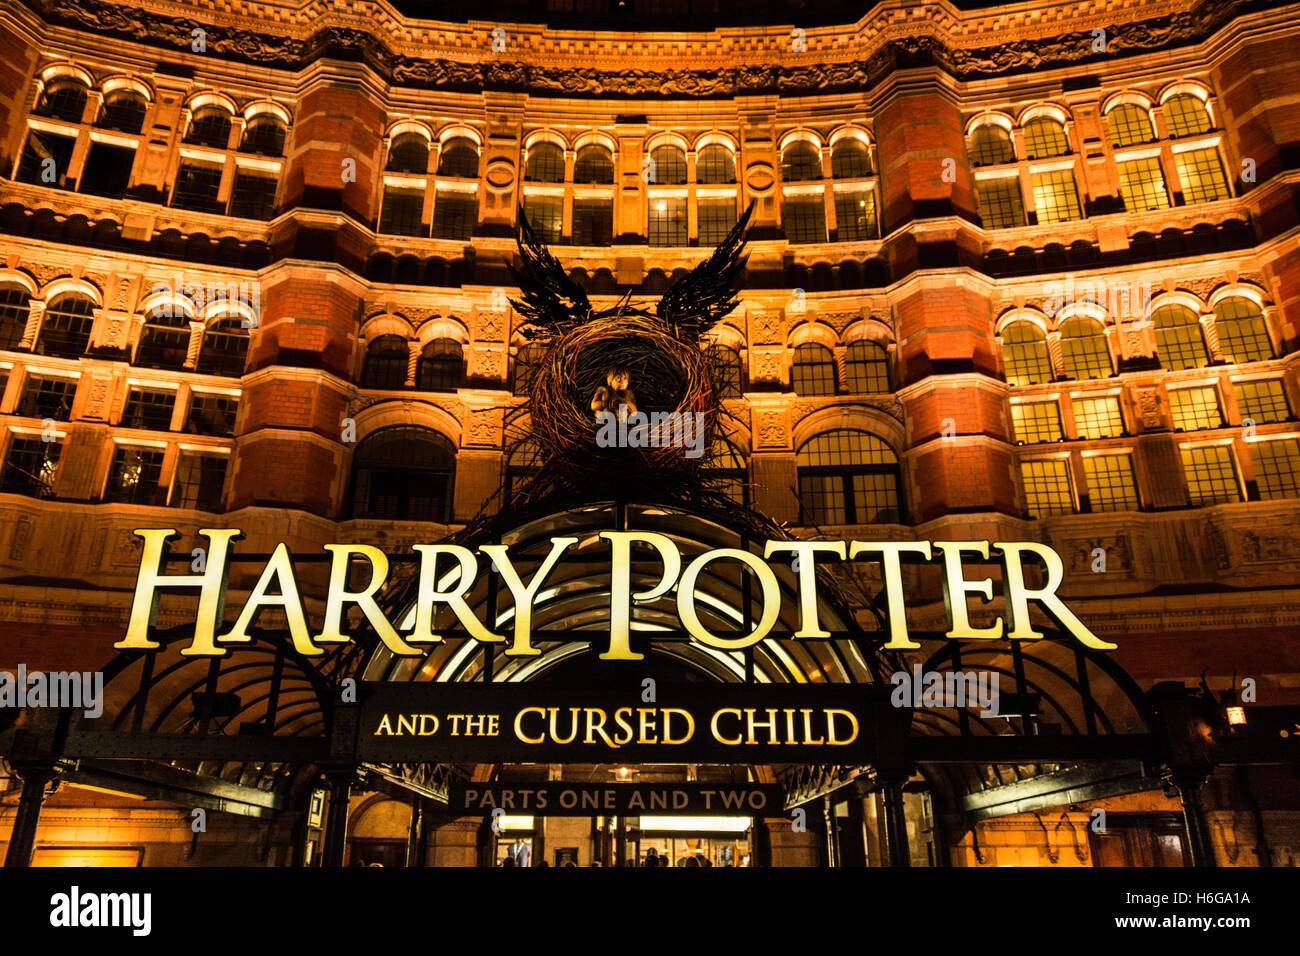 Harry Potter And The Cursed Child at the Palace Theatre London Stock